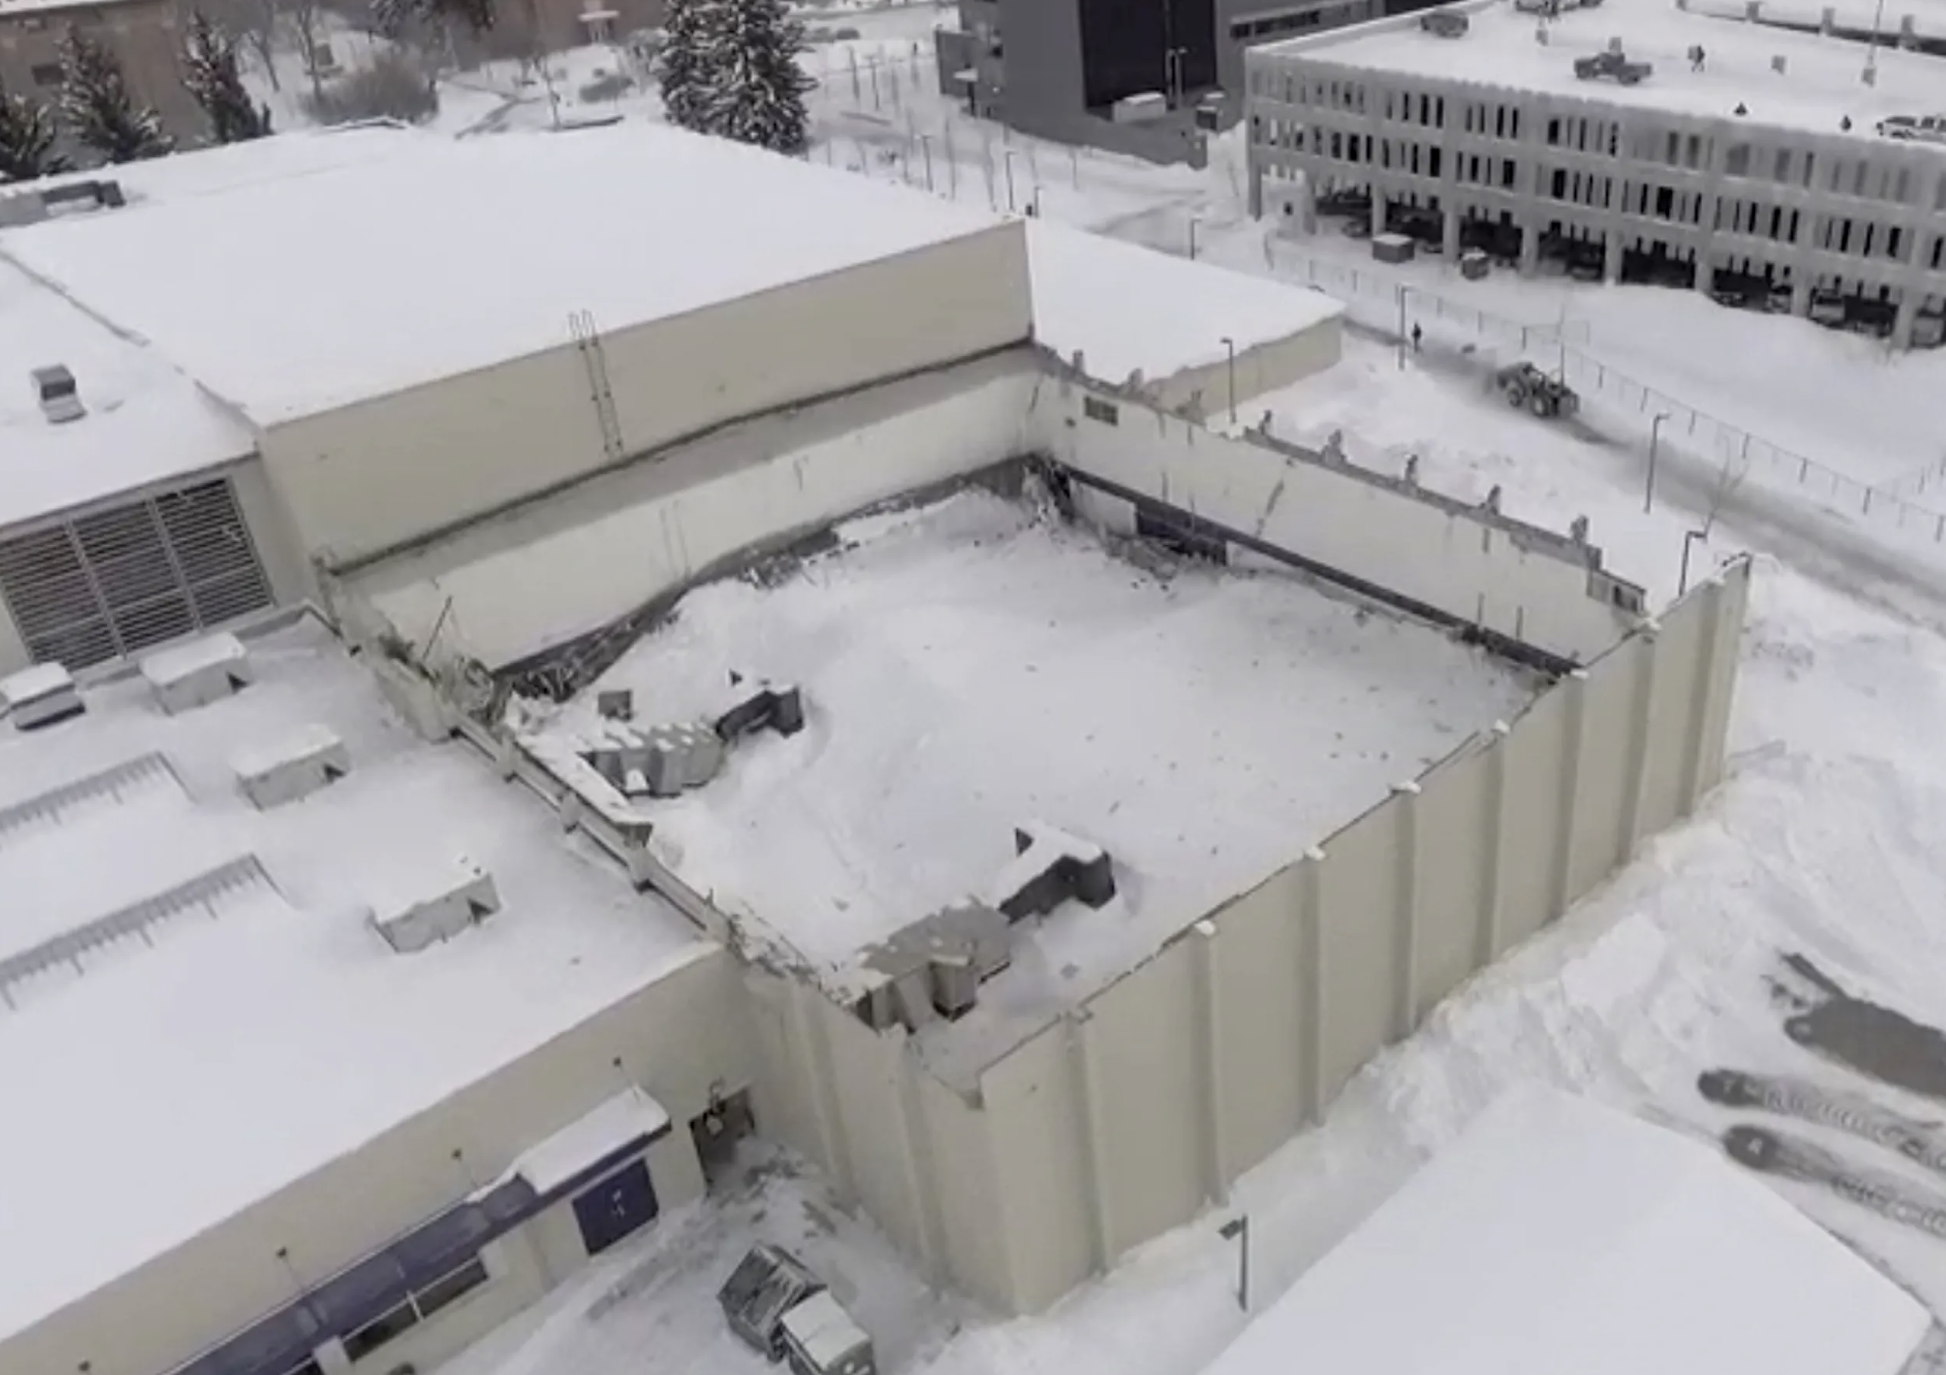 Despite its pretty, sparkling exterior, snow can actually be extremely dangerous. In March 2019, the roofs of two separate gymnasiums at Montana State University caved in due to extreme levels of snowfall. No one was injured in the ordeal. 